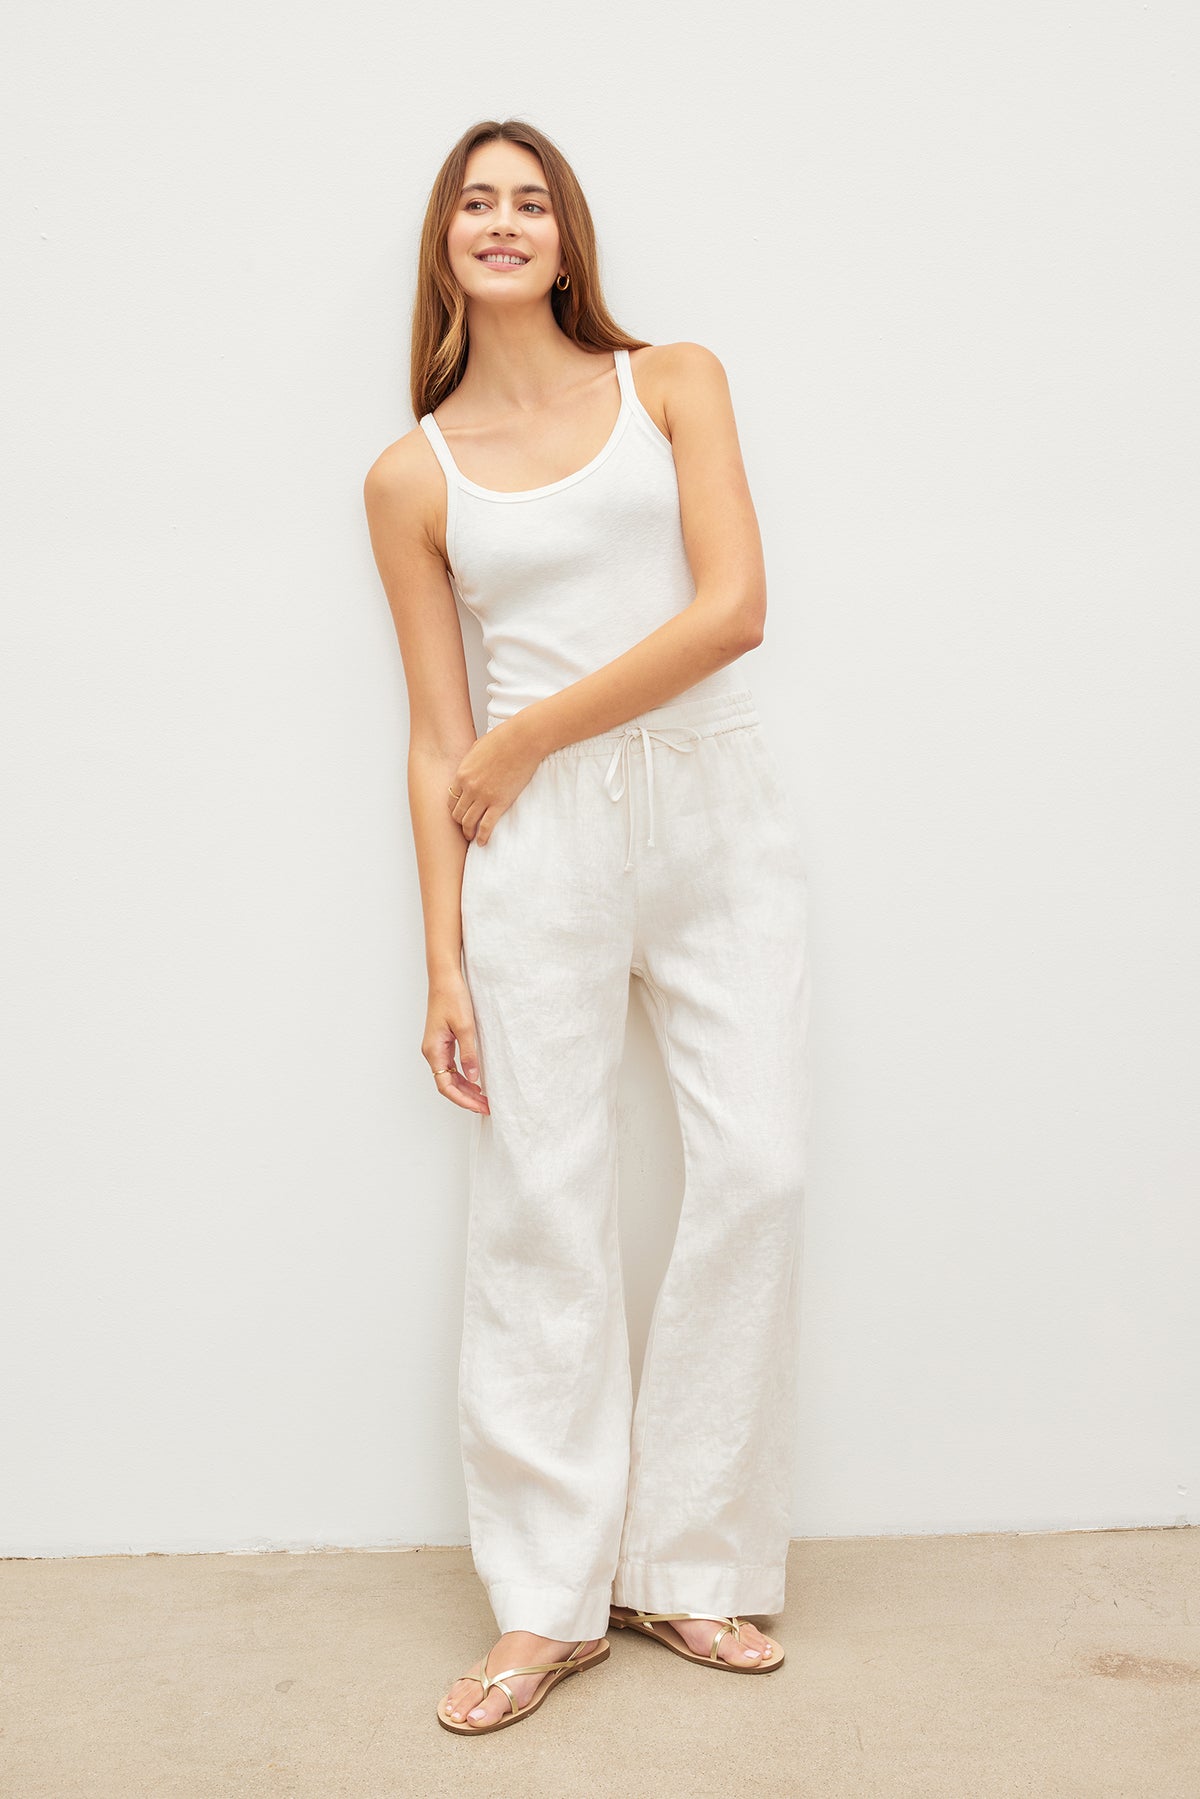   A woman wearing Velvet by Graham & Spencer's GWYNETH HEAVY LINEN PANT and a relaxed drape white tank top. 